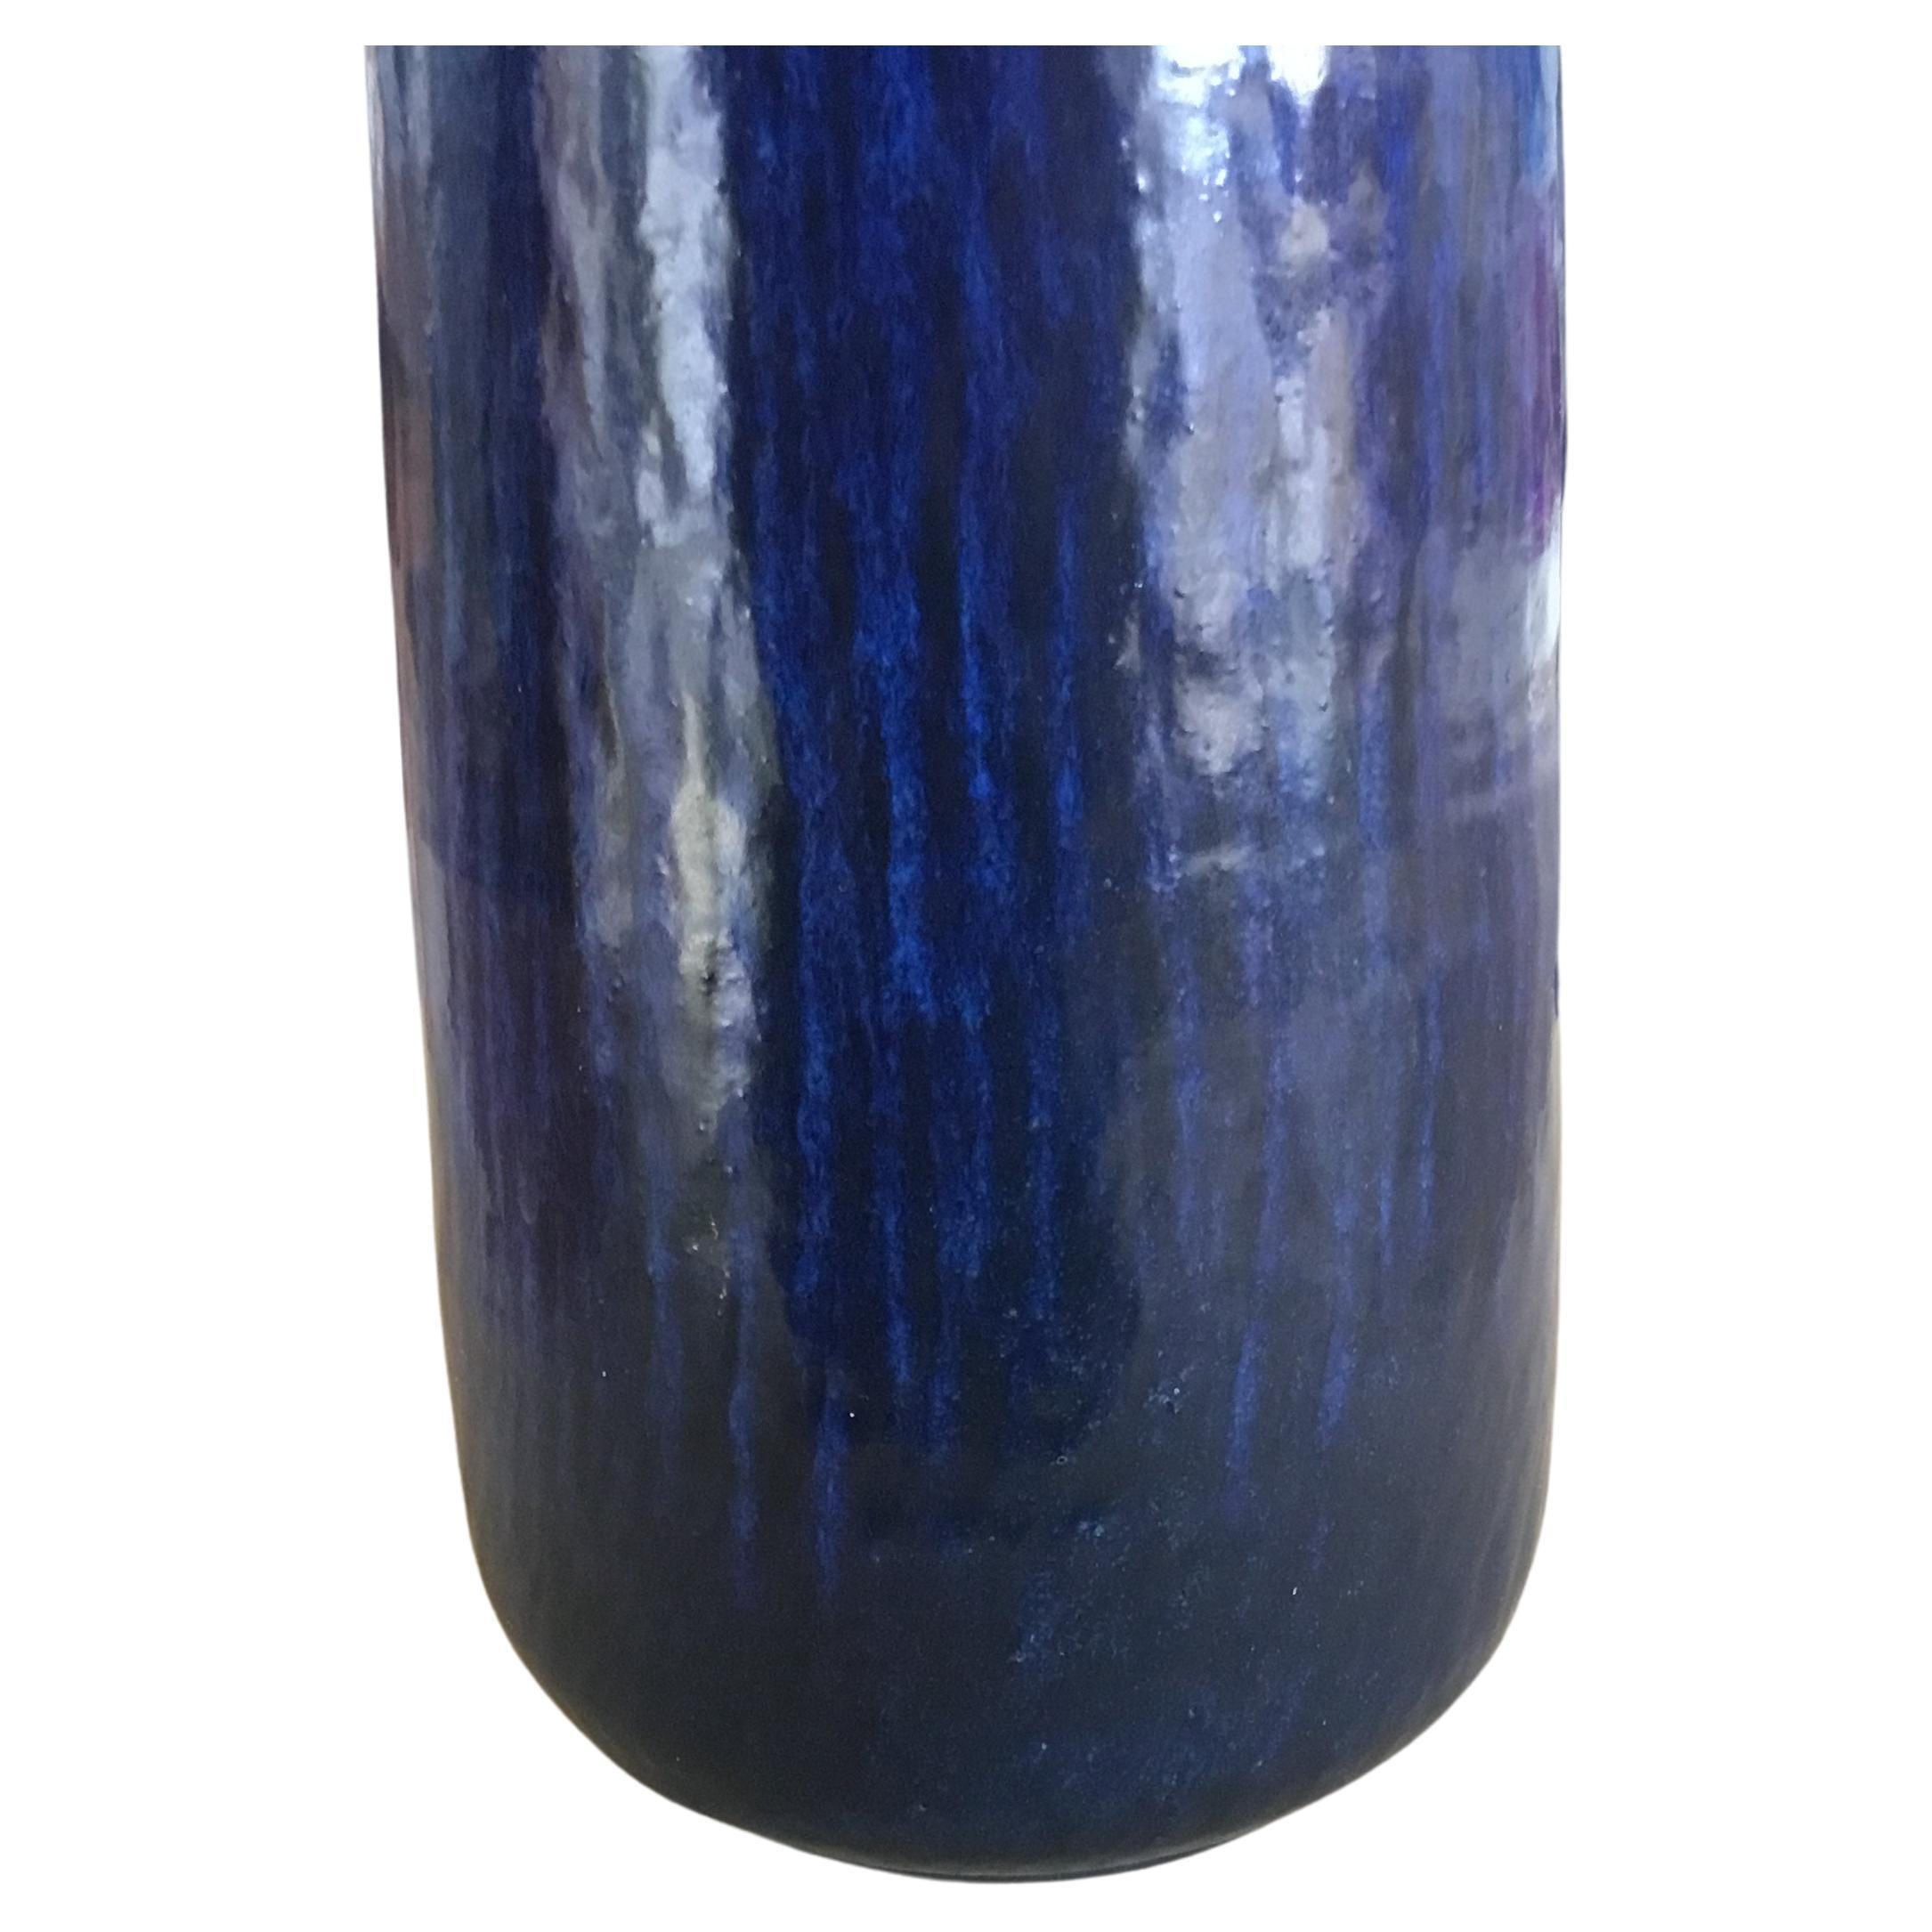 This very tall and slender vase was designed by Gunnar Nylund for Nymølle and produced in Denmark, circa 1960´s. It has a vivid dark navy blue glaze over a radiating pattern. Measure: 17.7” Tall.

The vase is a first edition and in very good vintage